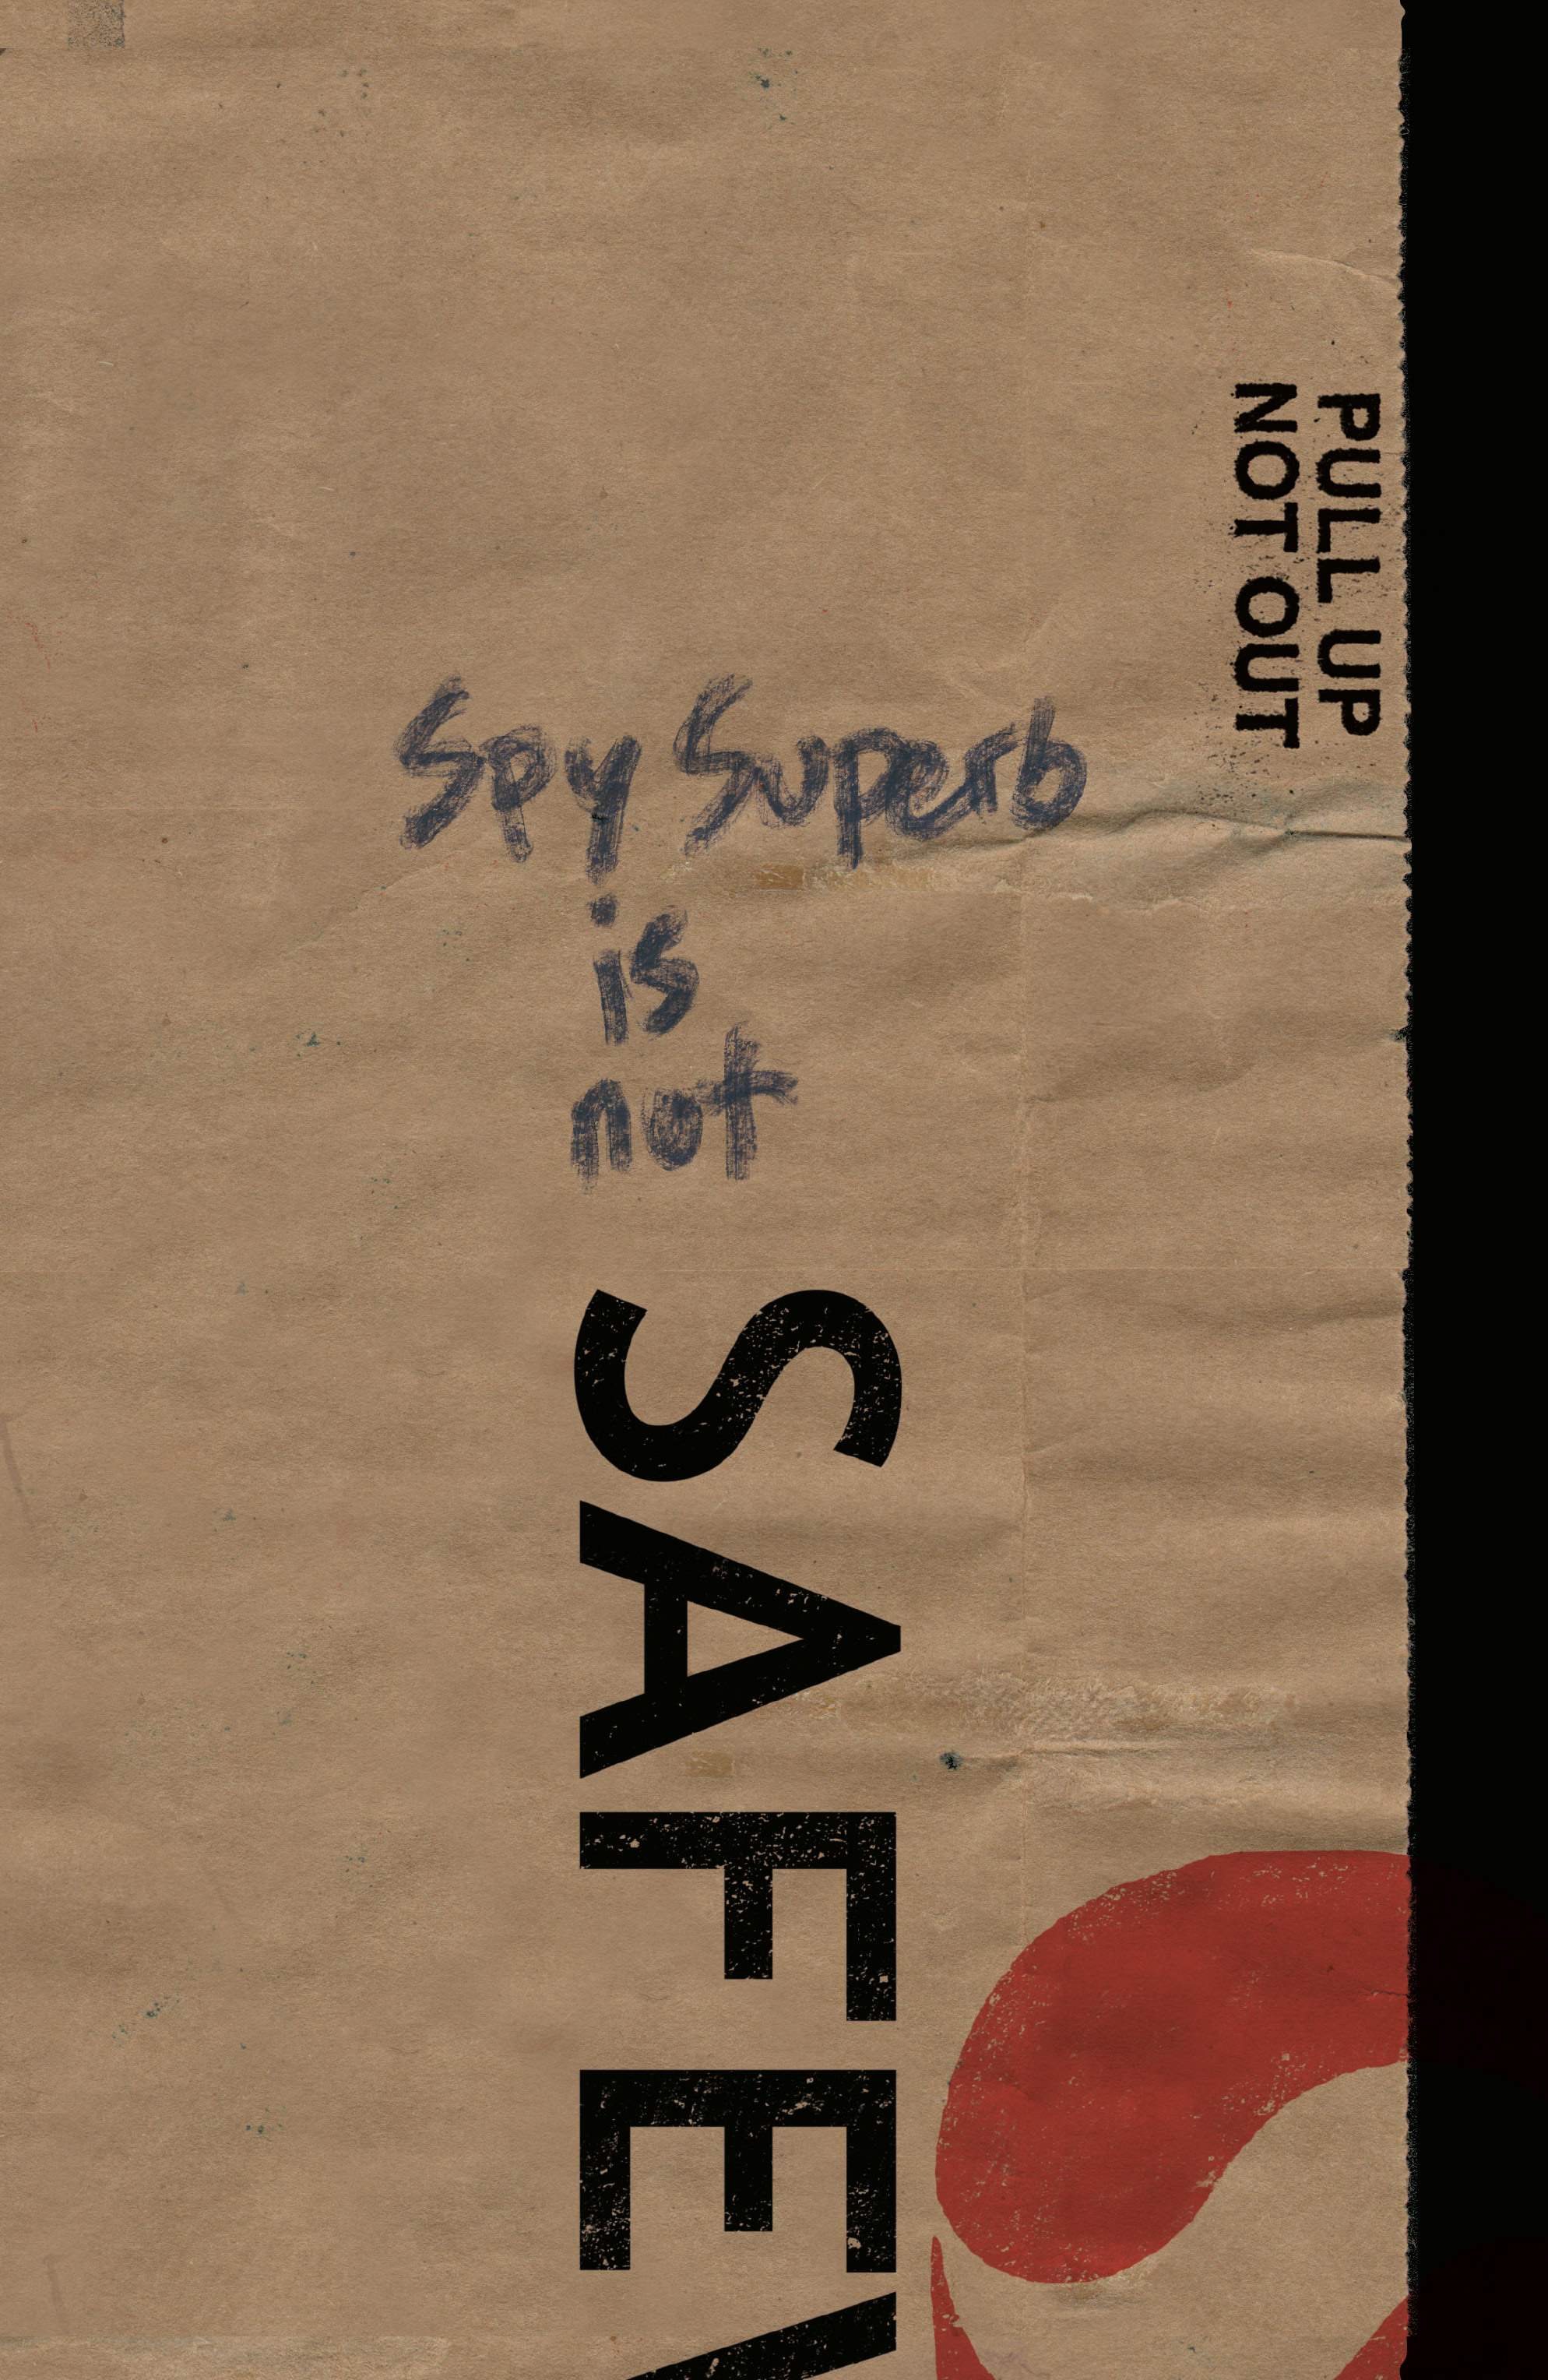 Read online Spy Superb comic -  Issue #2 - 1